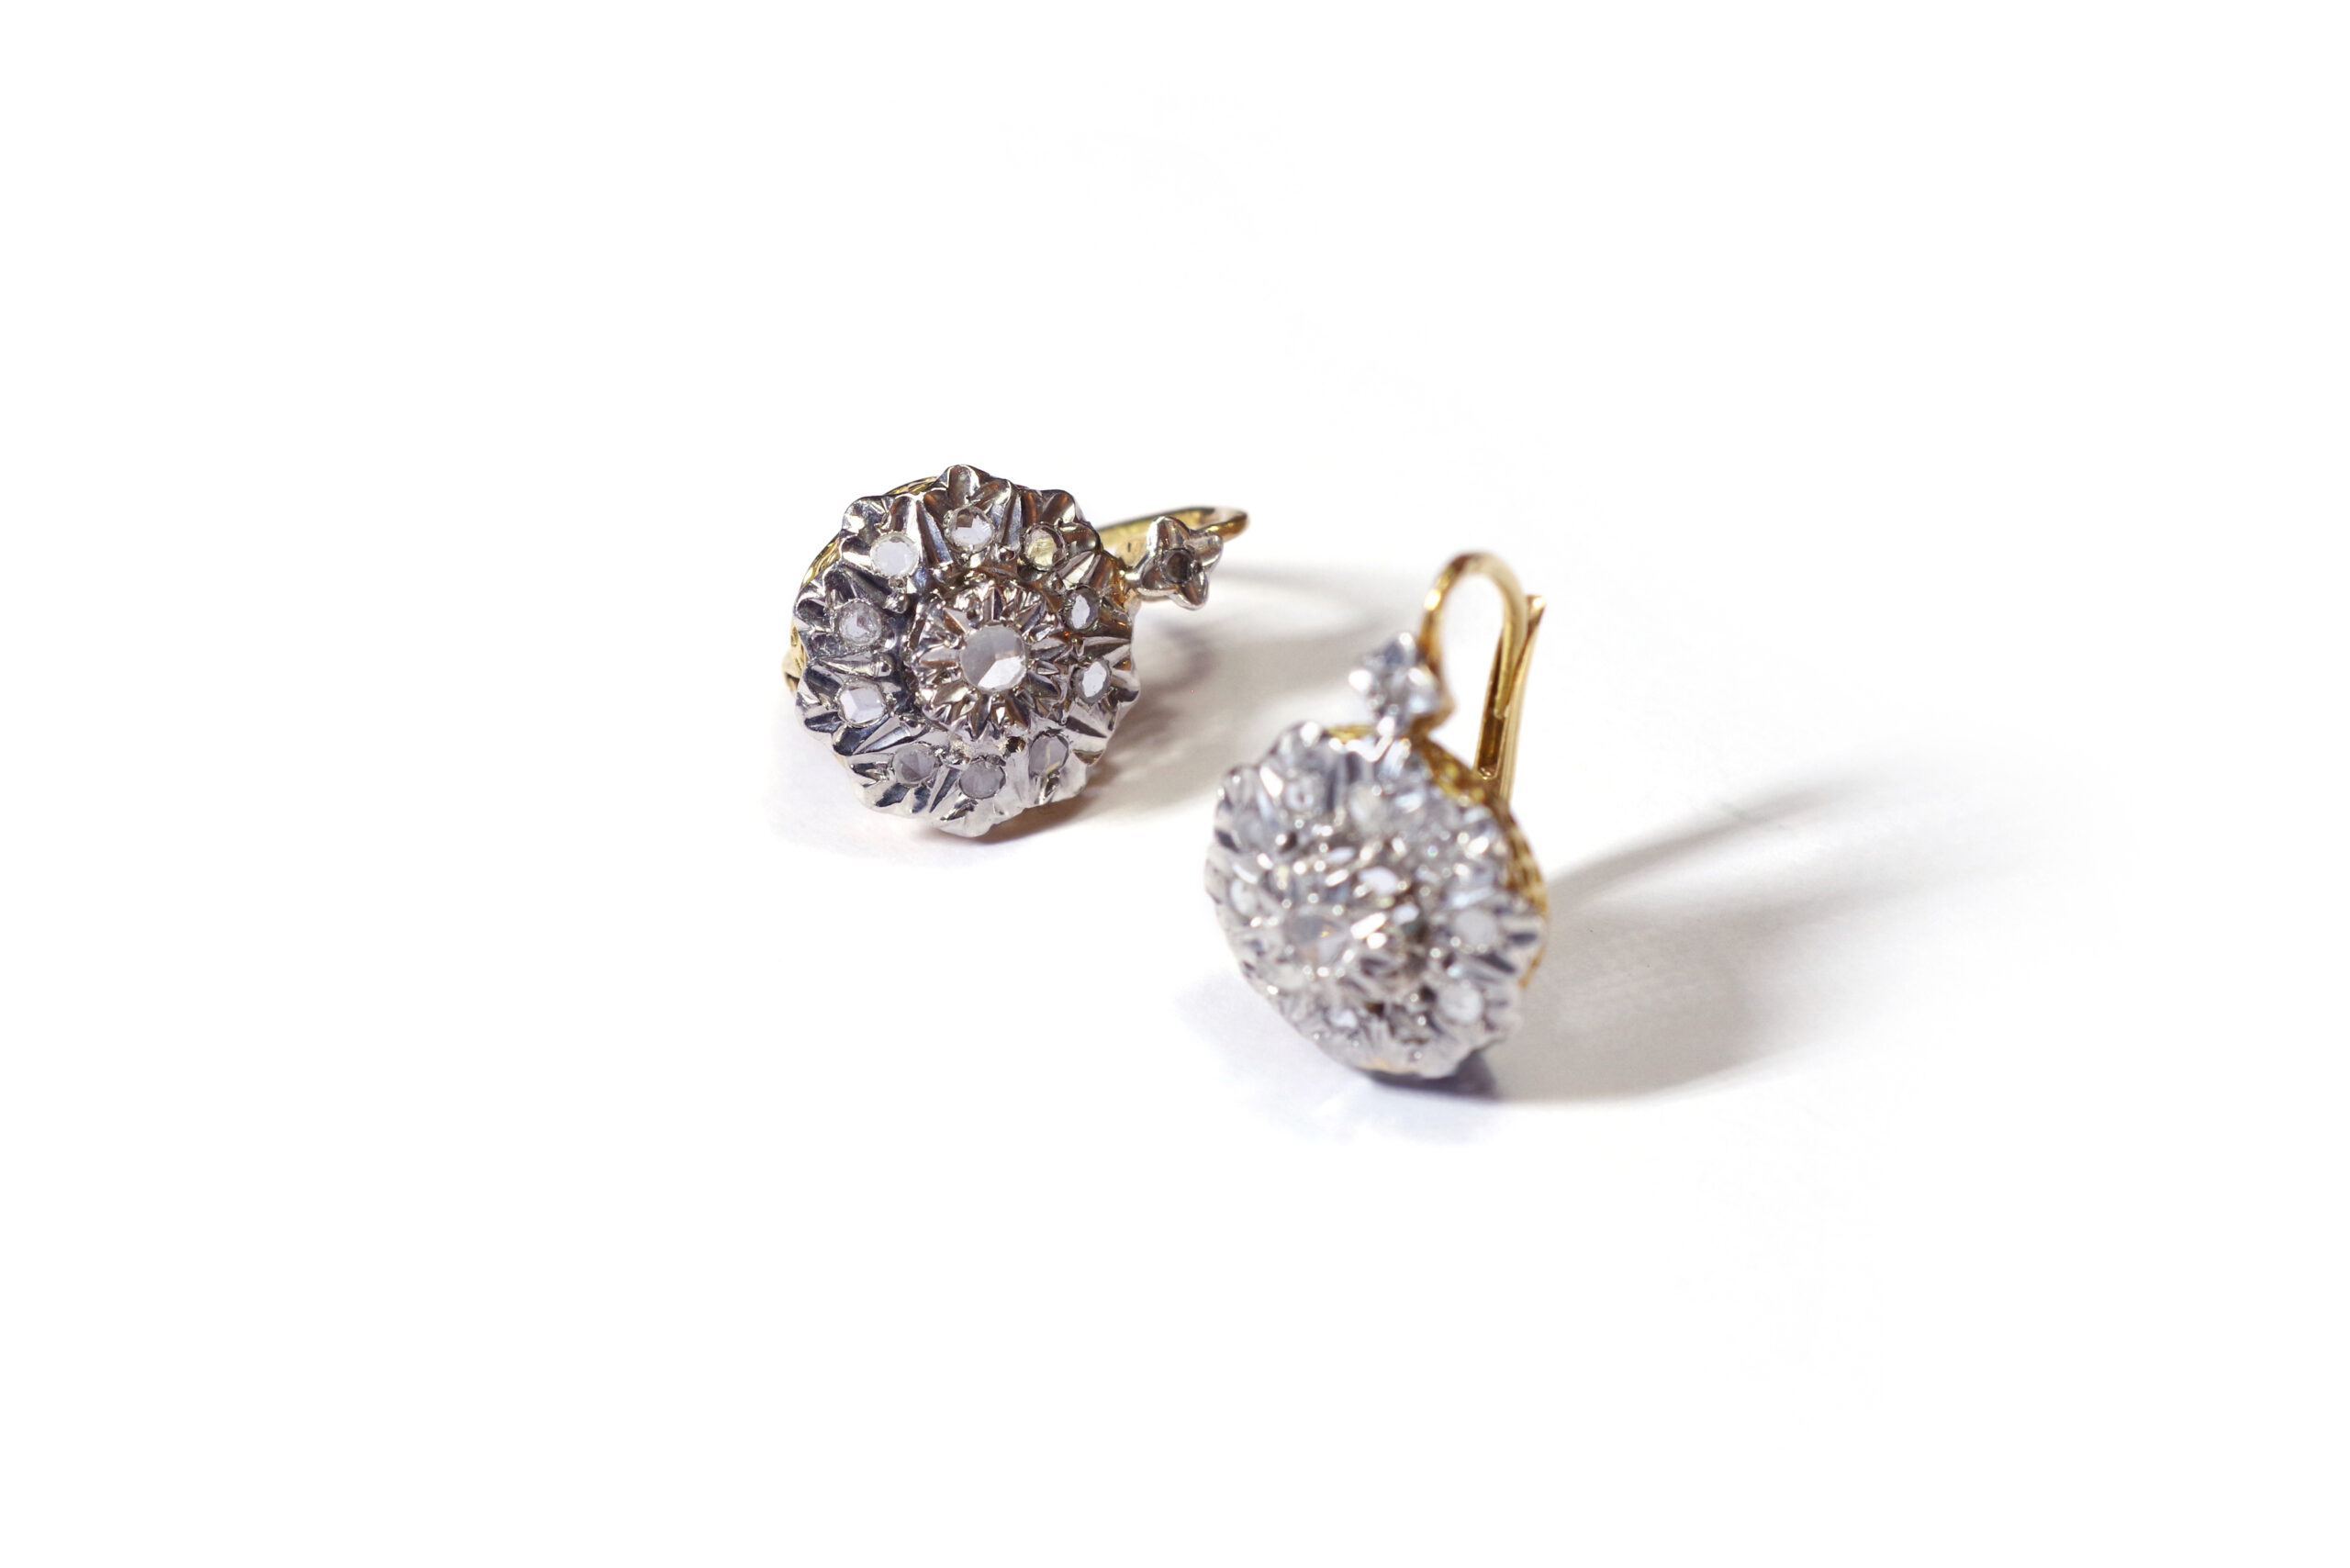 Edwardian diamond earrings in platinum and gold